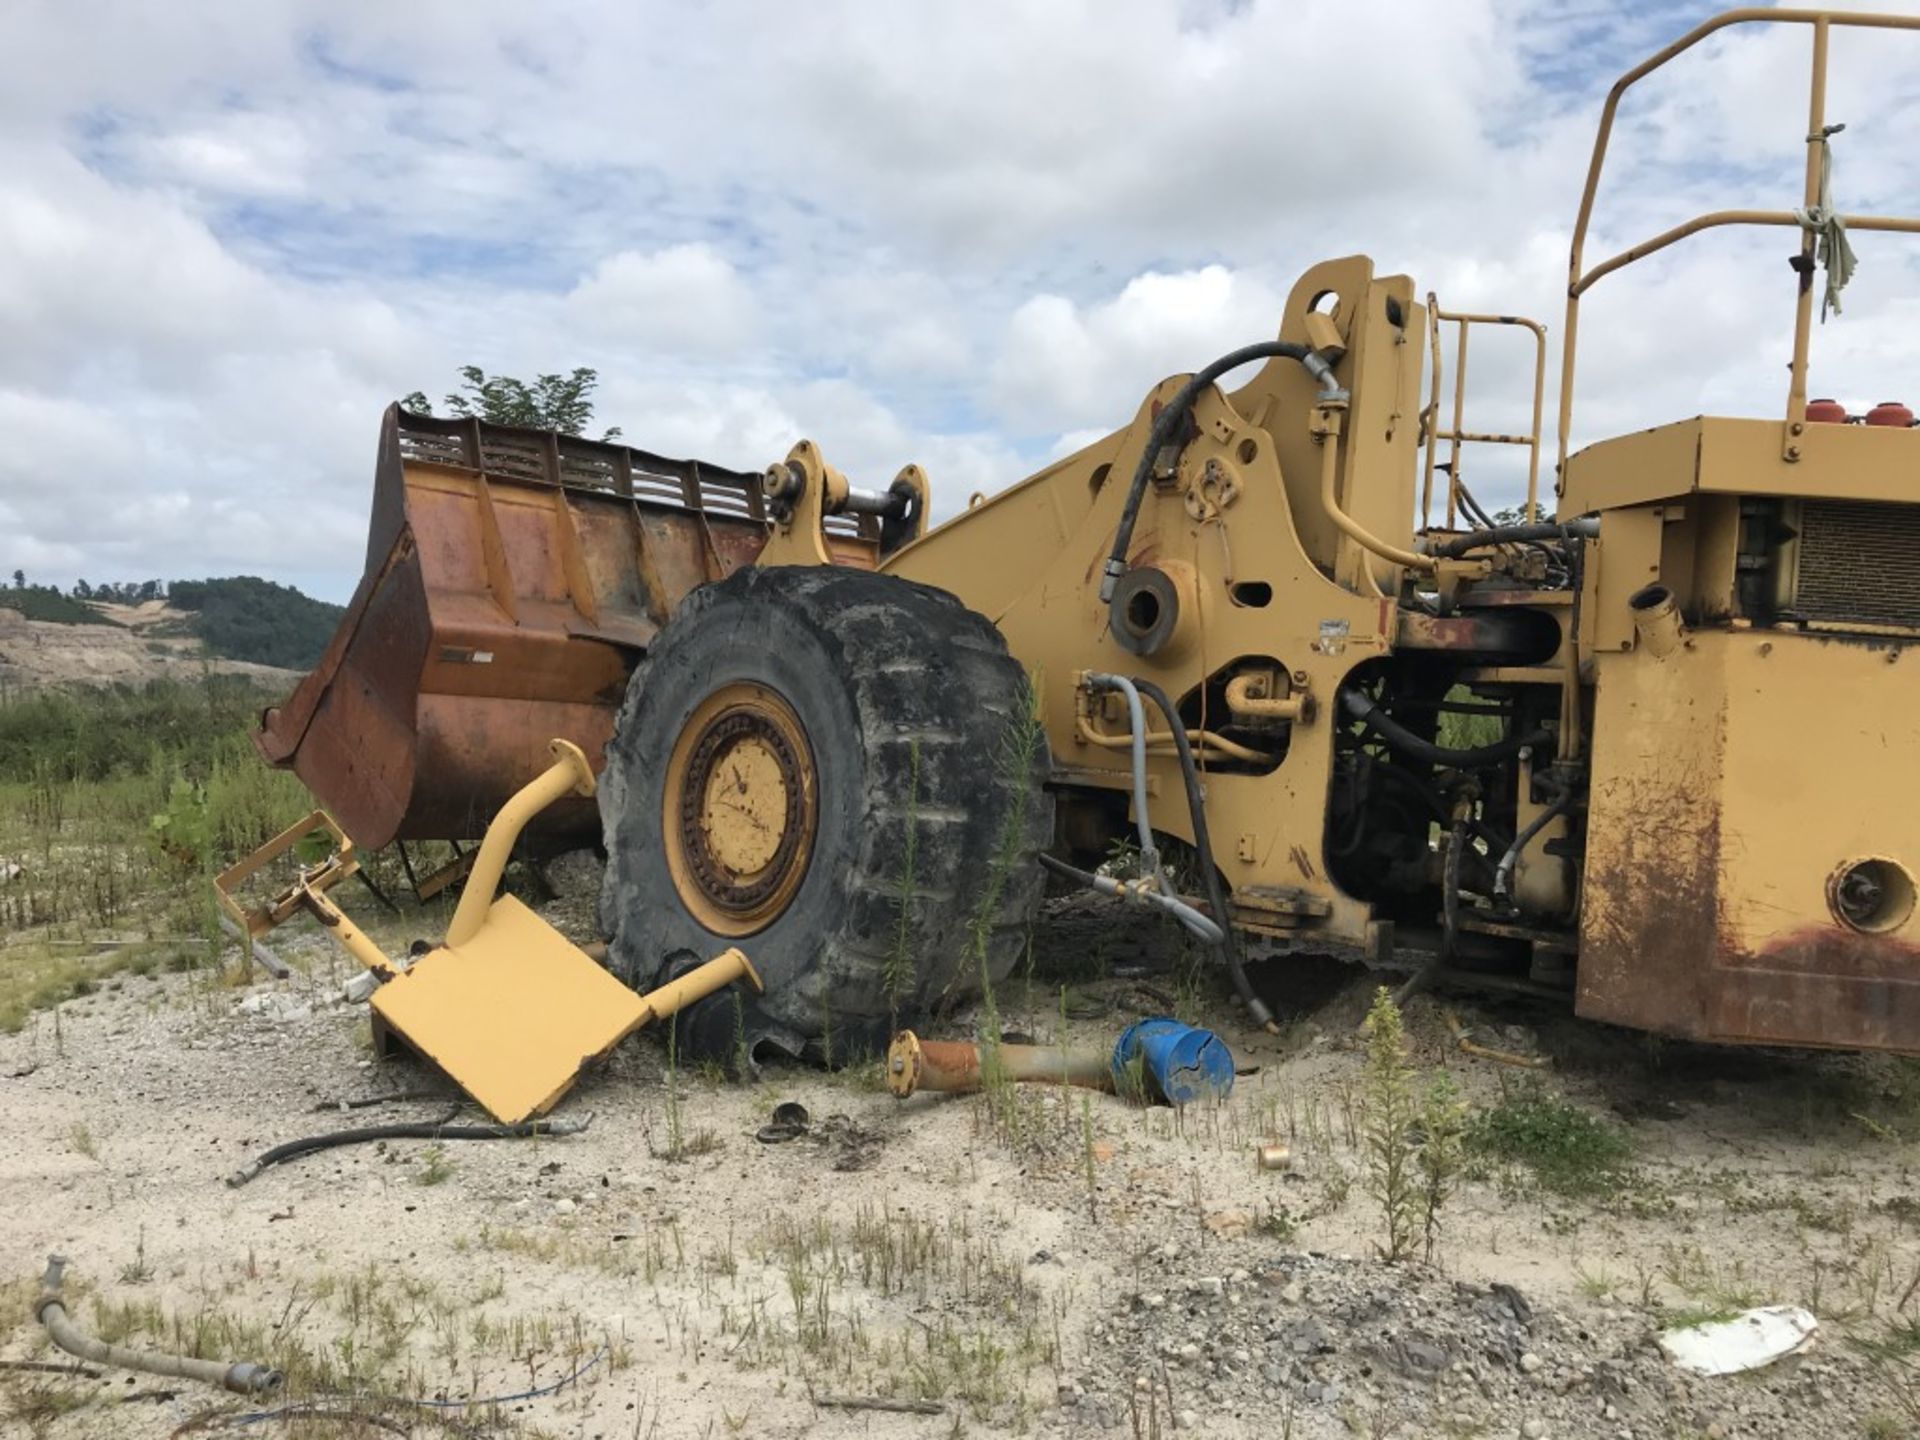 2006 CATERPILLAR 988H WHEEL LOADER, ROCKLAND BUCKET, PARTED OUT LOCATION: TWIN BRANCH SOUTH - Image 3 of 10